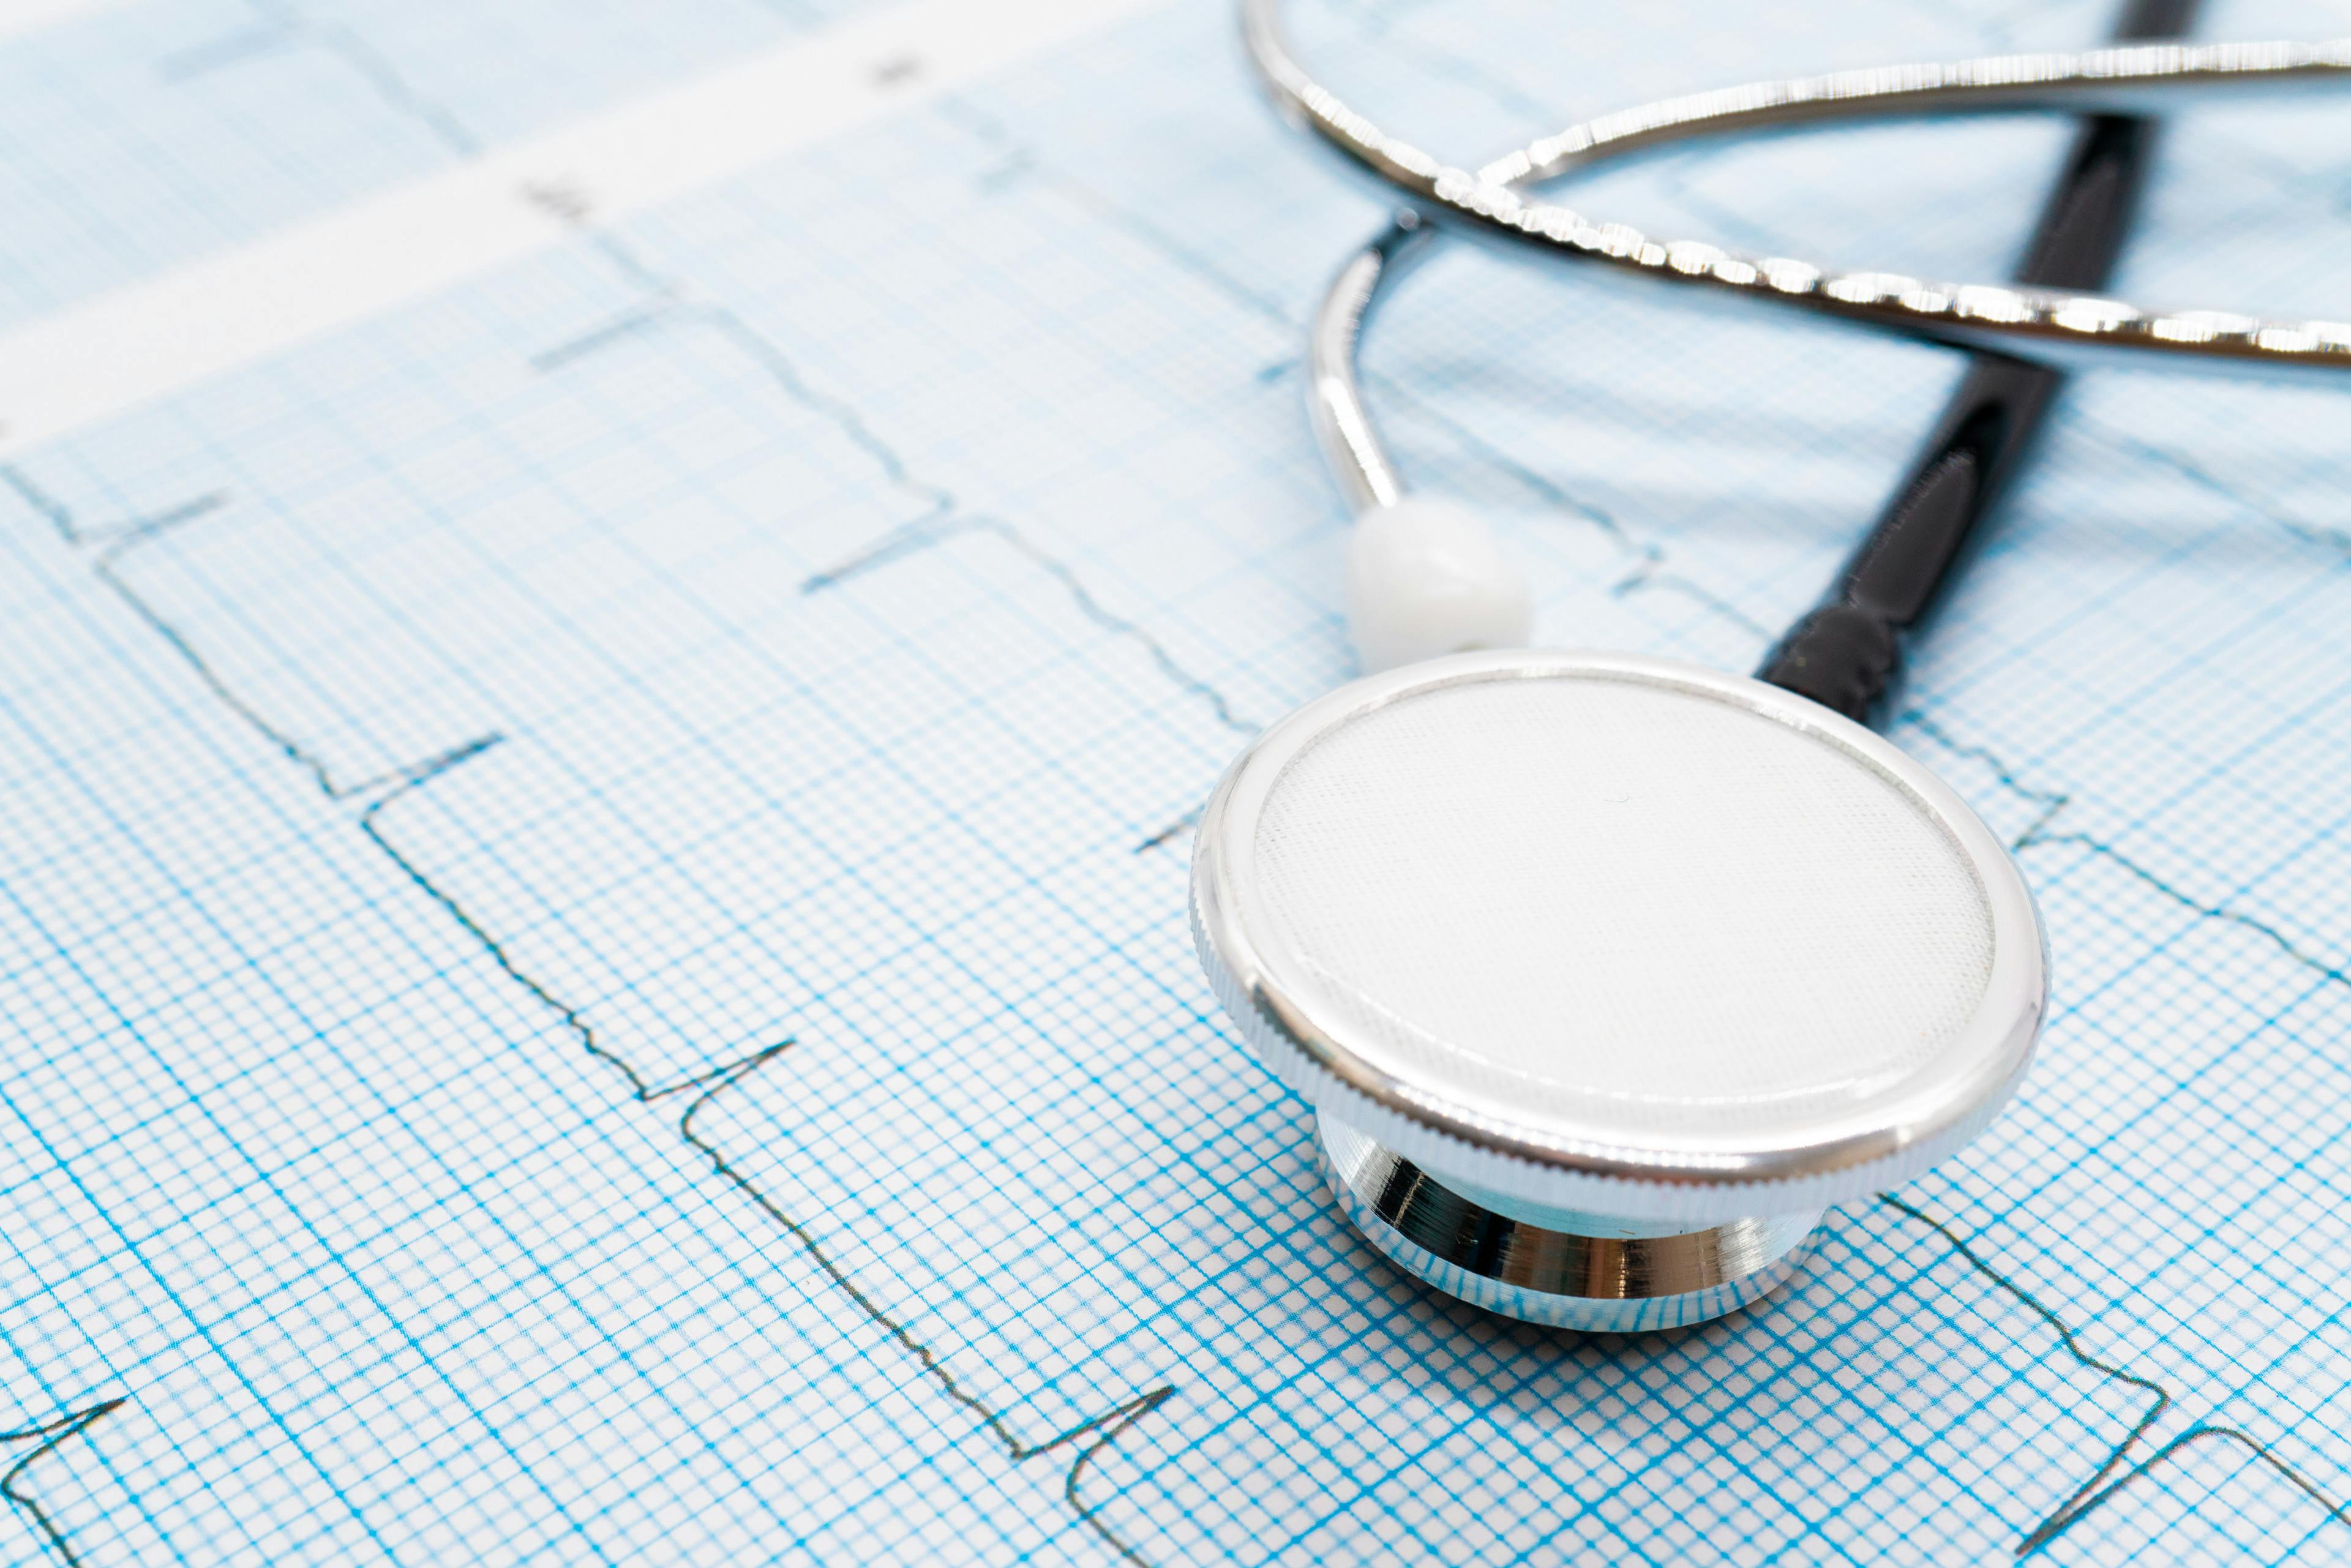   Cardiac Monitoring at Home Significantly Improves AF Detection